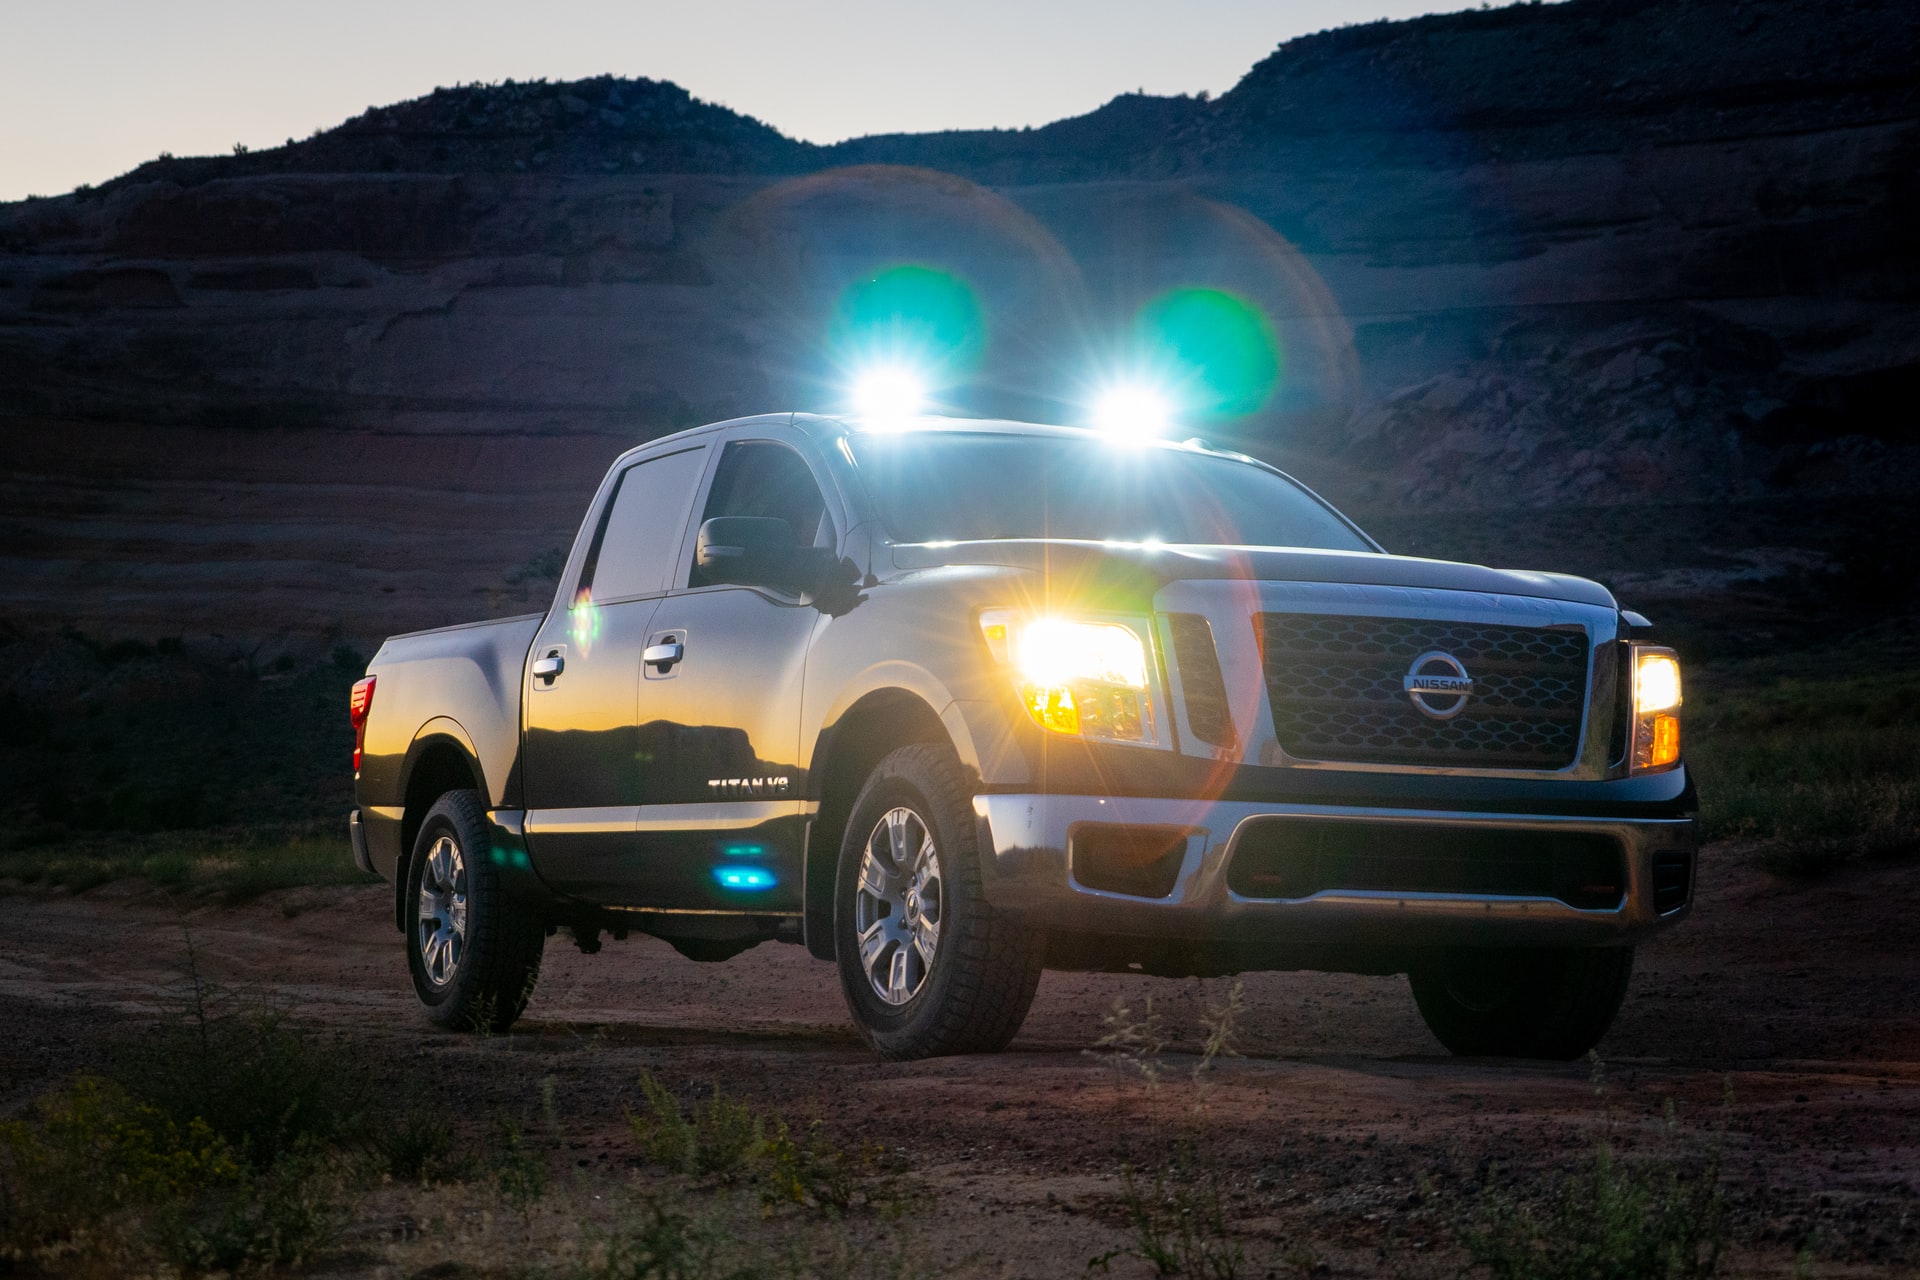 Extra light is always beneficial for off-road travel.